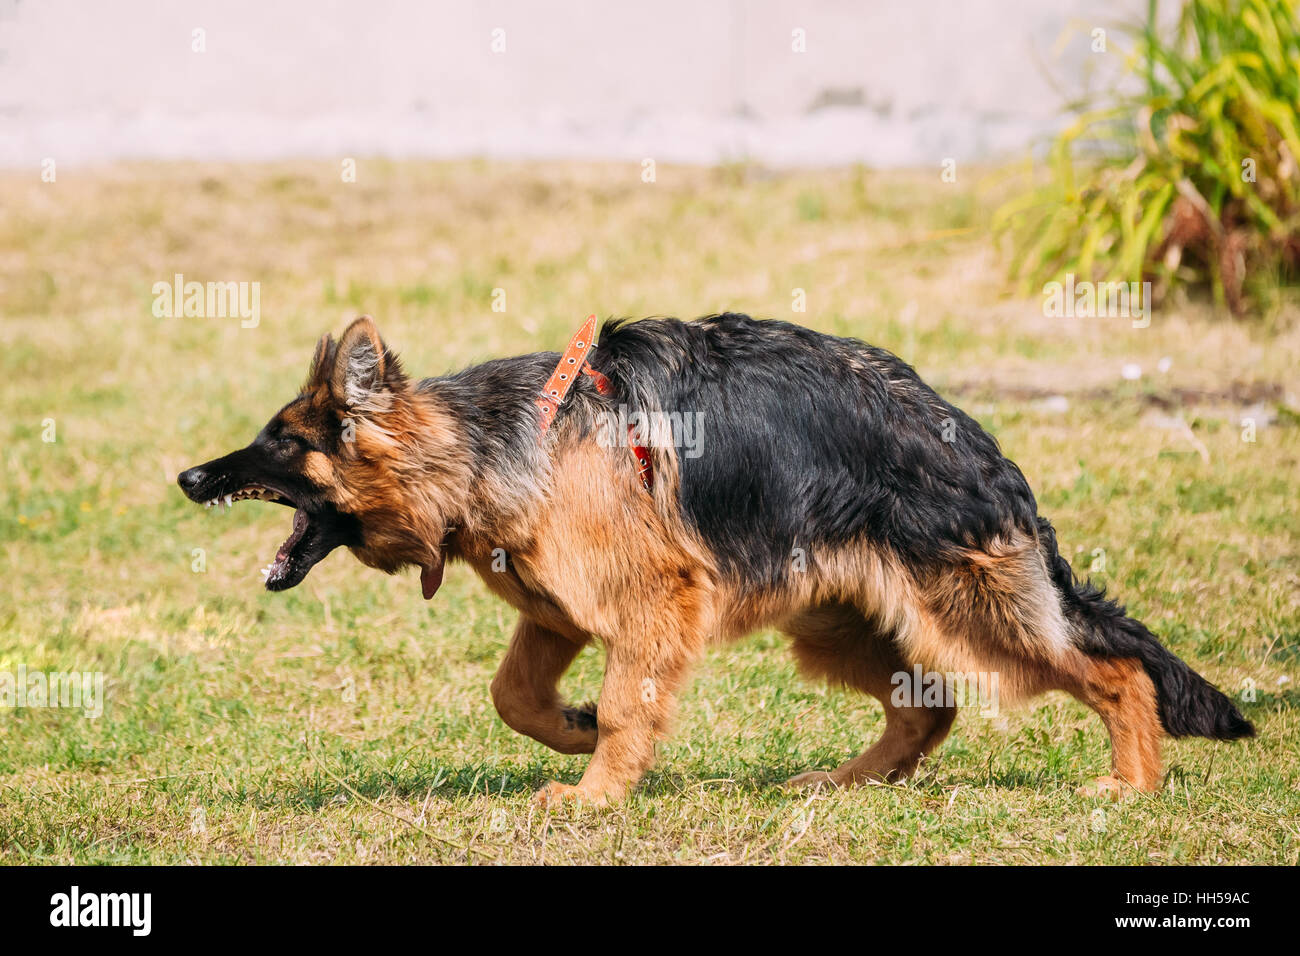 Anger Aggressive Long-Haired Purebred German Shepherd Adult Dog Or Alsatian Wolf Dog On Lead Going To Attack With Widely Opened Mouth Jaws. Stock Photo